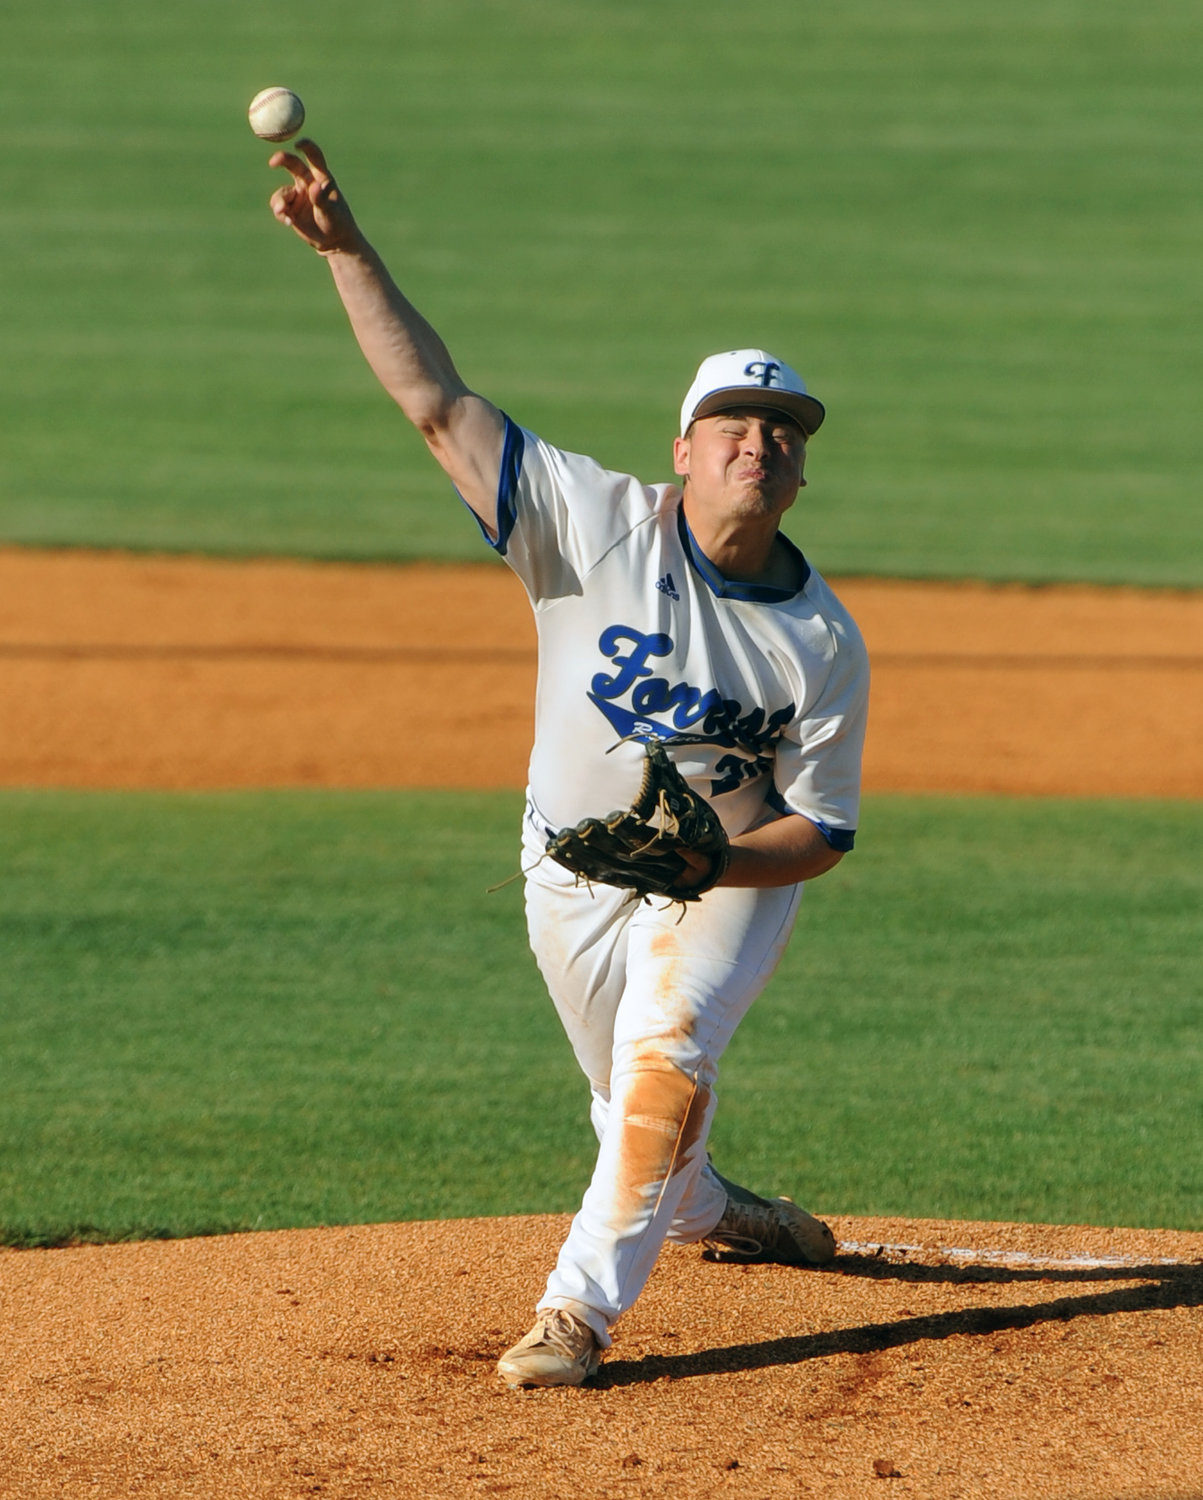 Forrest starter Riley Durbin was dominant in his outing against Stratford, striking out eight in three innings pitched.